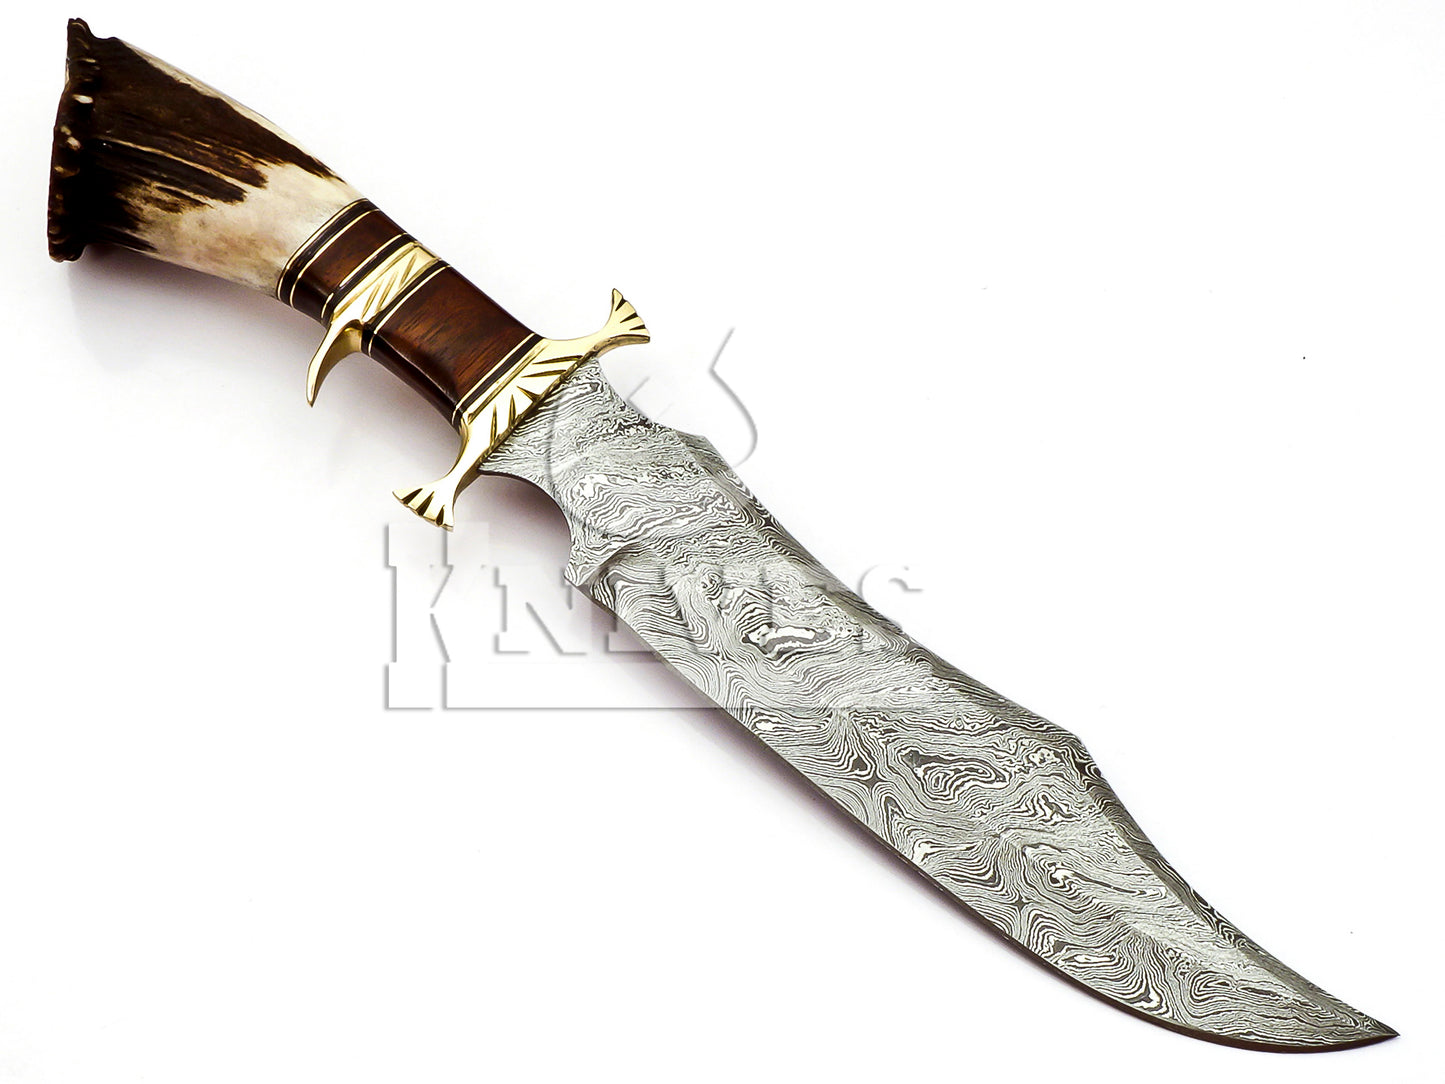 Damascus Steel Bowie with Stag Horn Handle